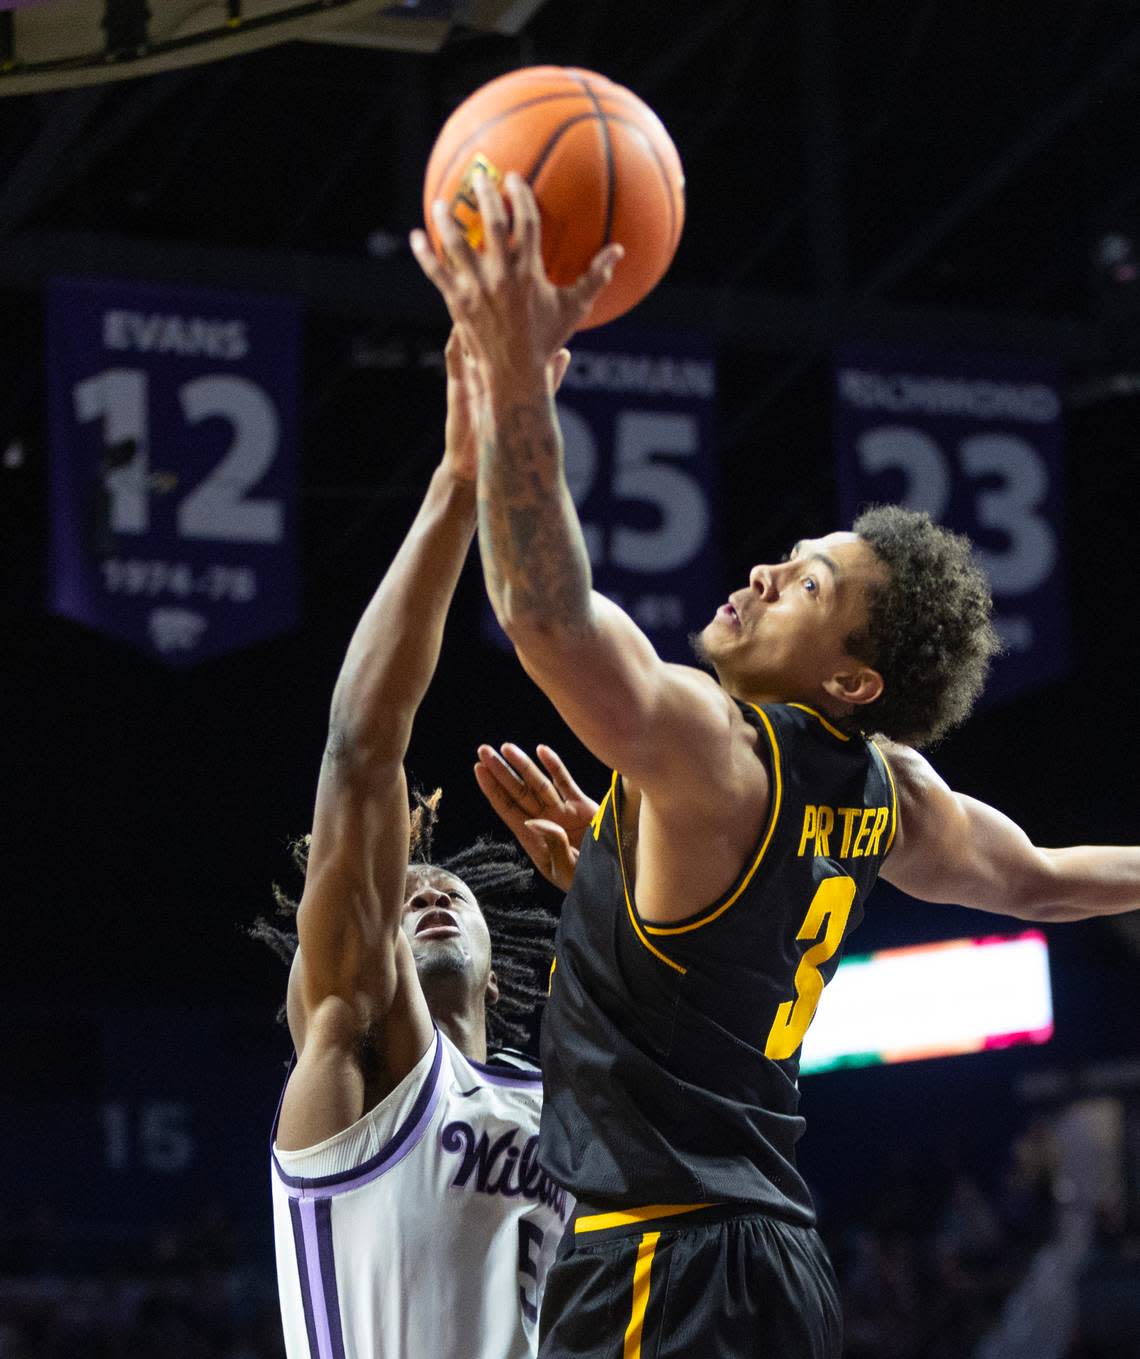 Wichita State’s Craig Porter Jr., fights for a rebound against Kansas State’s Cam Carter during the second half on Saturday night in Manhattan.